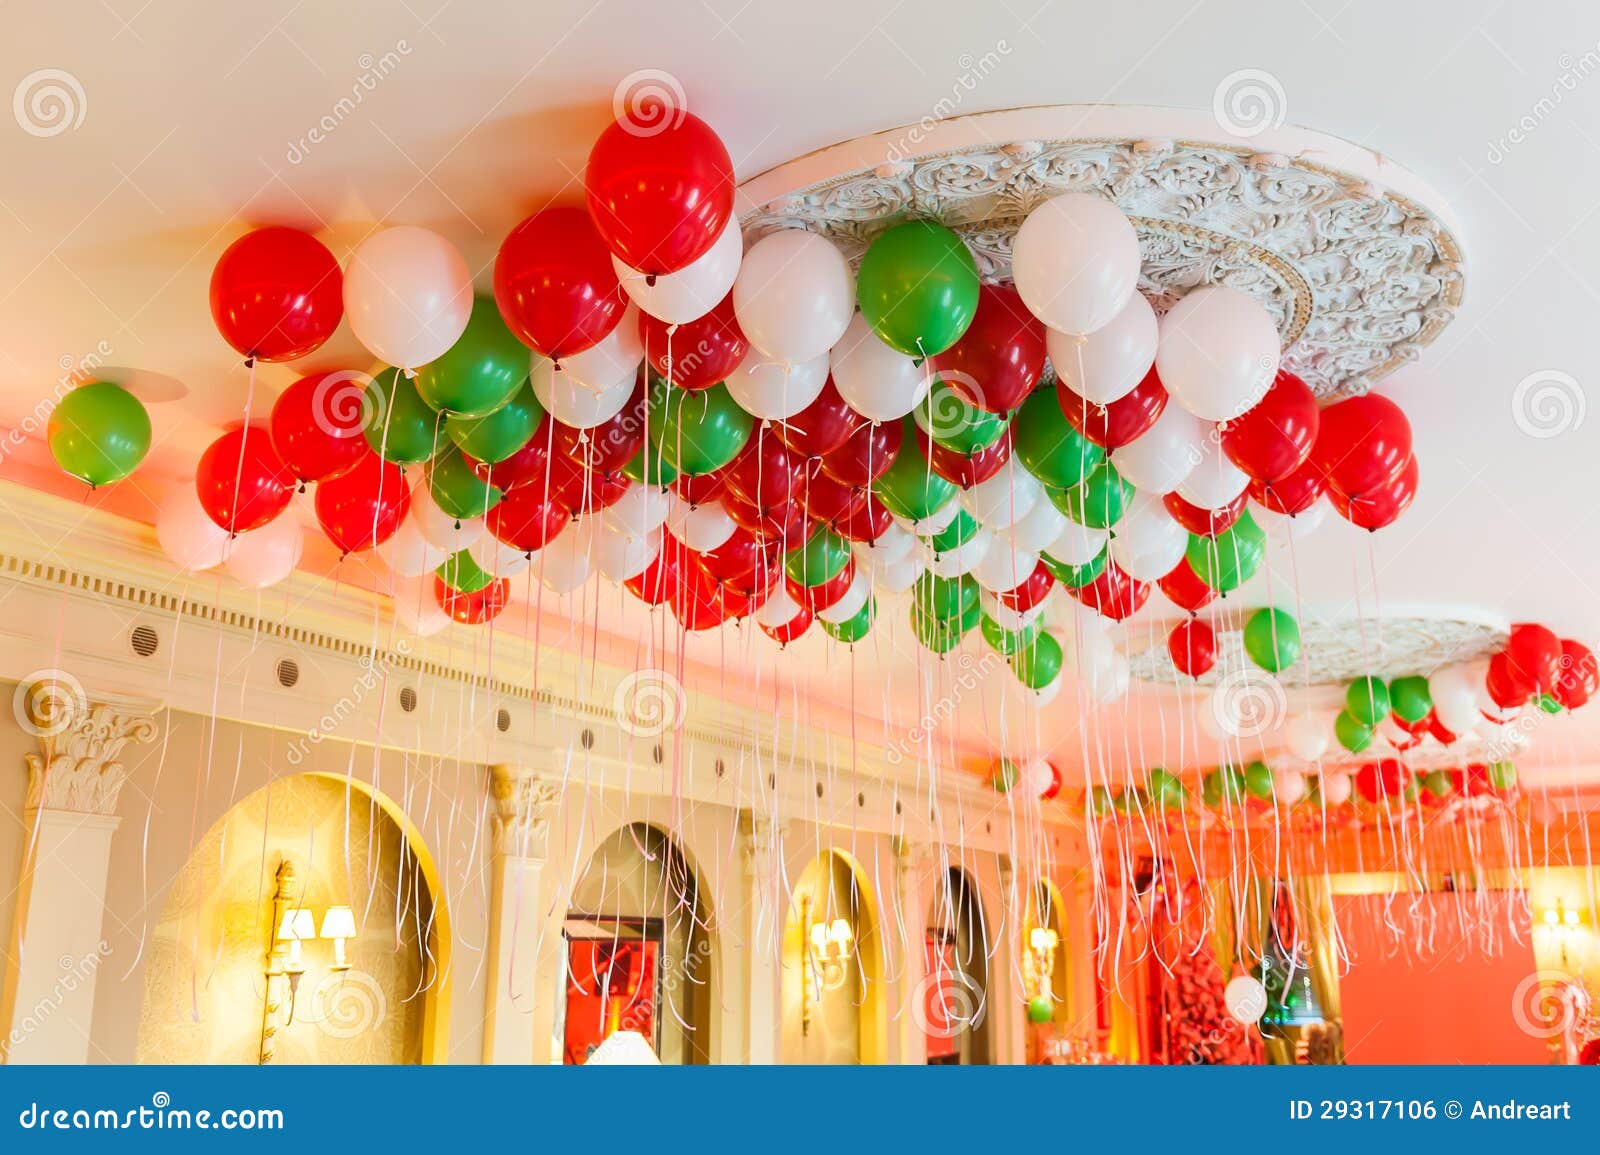 helium balloons on ceiling